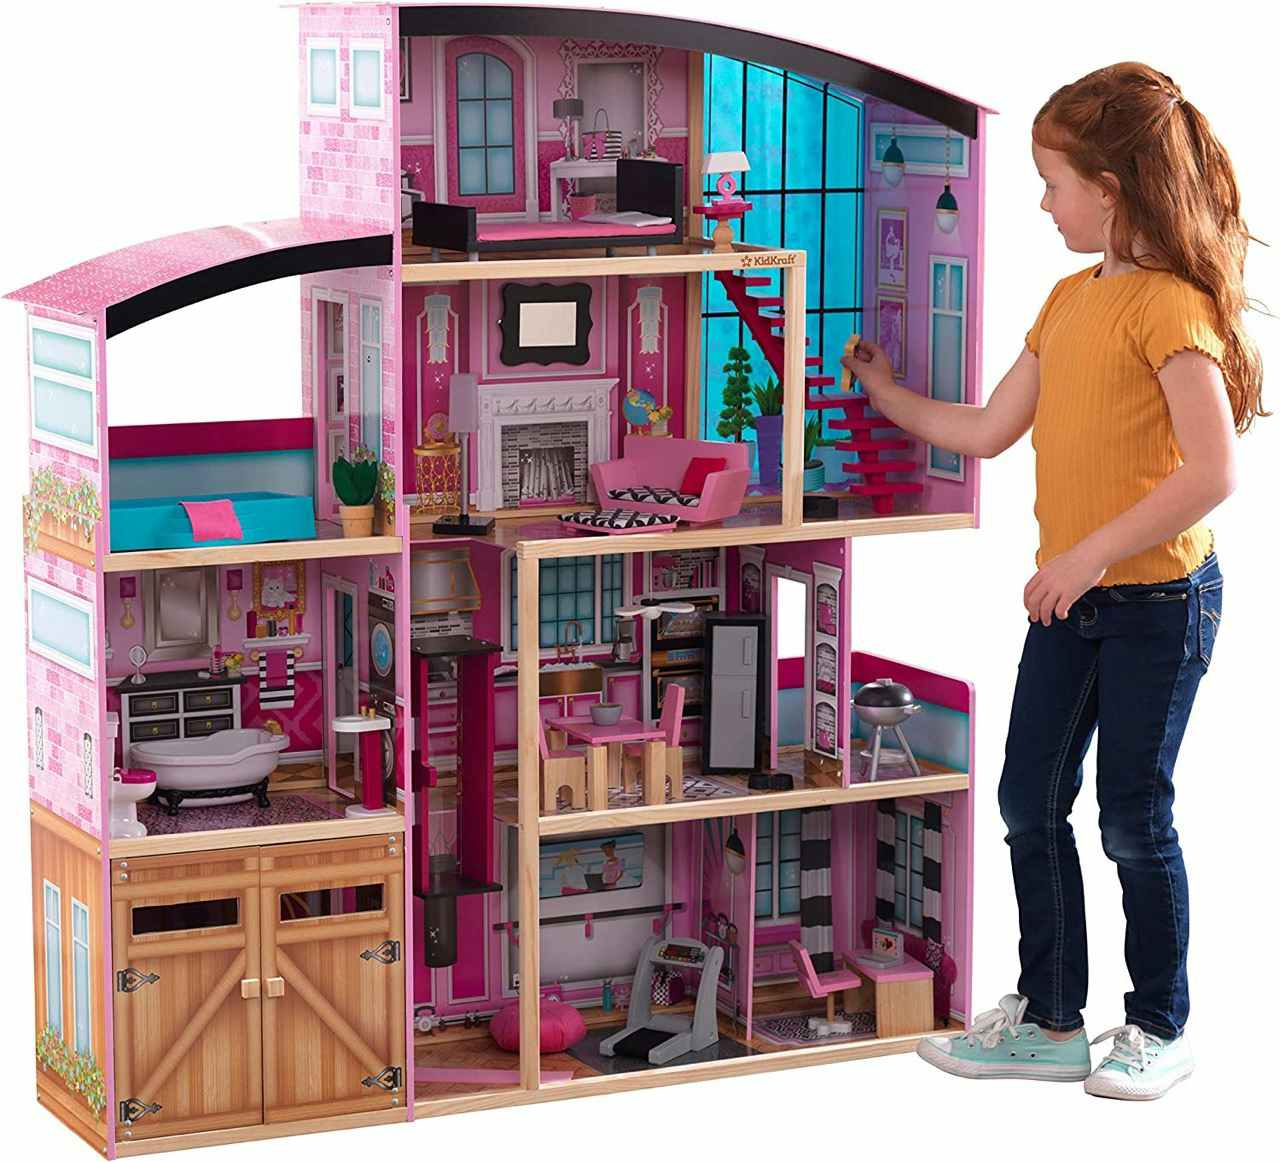 A child playing with a KidKraft Shimmer Mansion Wooden Dollhouse